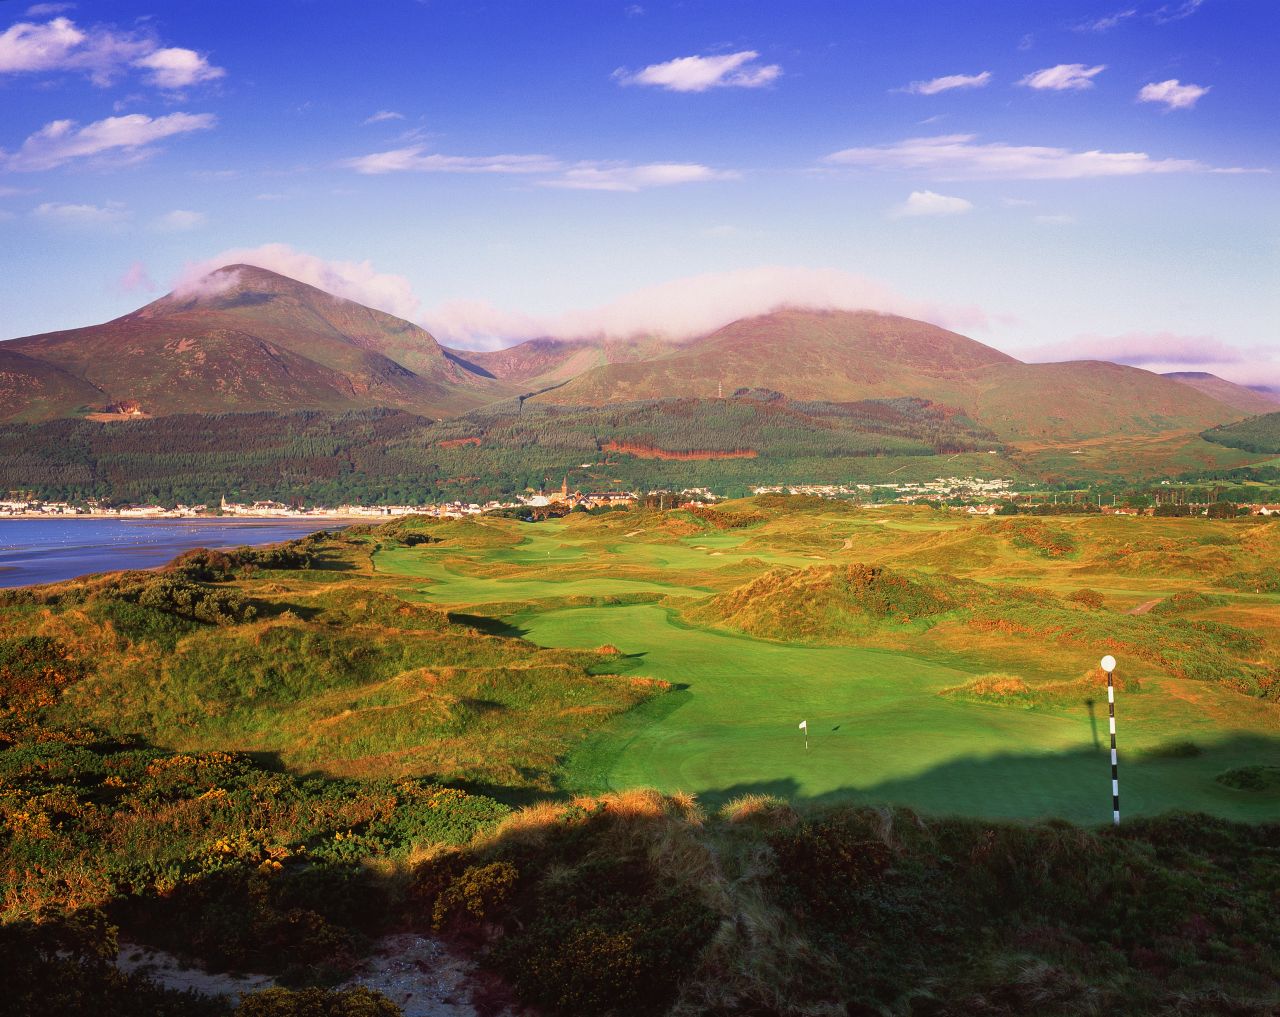 Though it's never hosted a professional major, Royal County Down is a worthy inclusion on any golfer's wish list. The magical links course is perennially voted one of the best in the world.